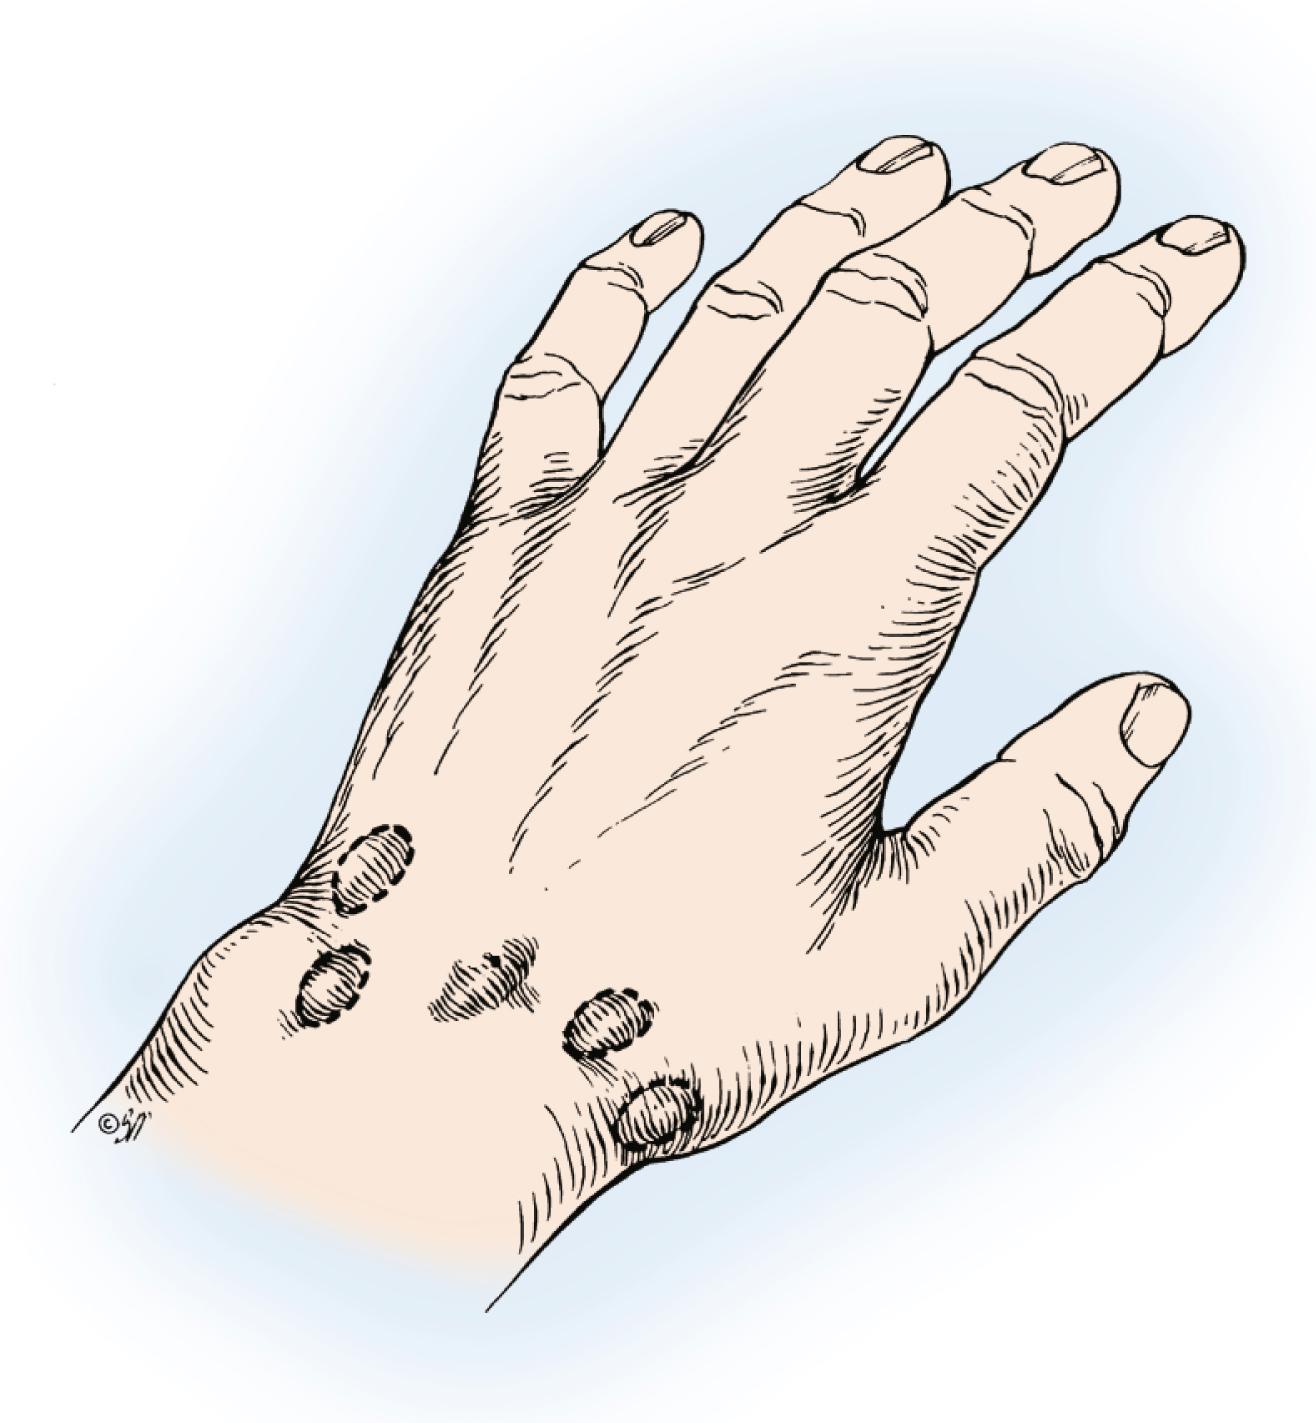 Fig. 59.16, A few of the many possible locations of dorsal wrist ganglions. The most common site is directly over the scapholunate ligament. The others (dashed circles) are connected to the scapholunate ligament through an elongated pedicle.